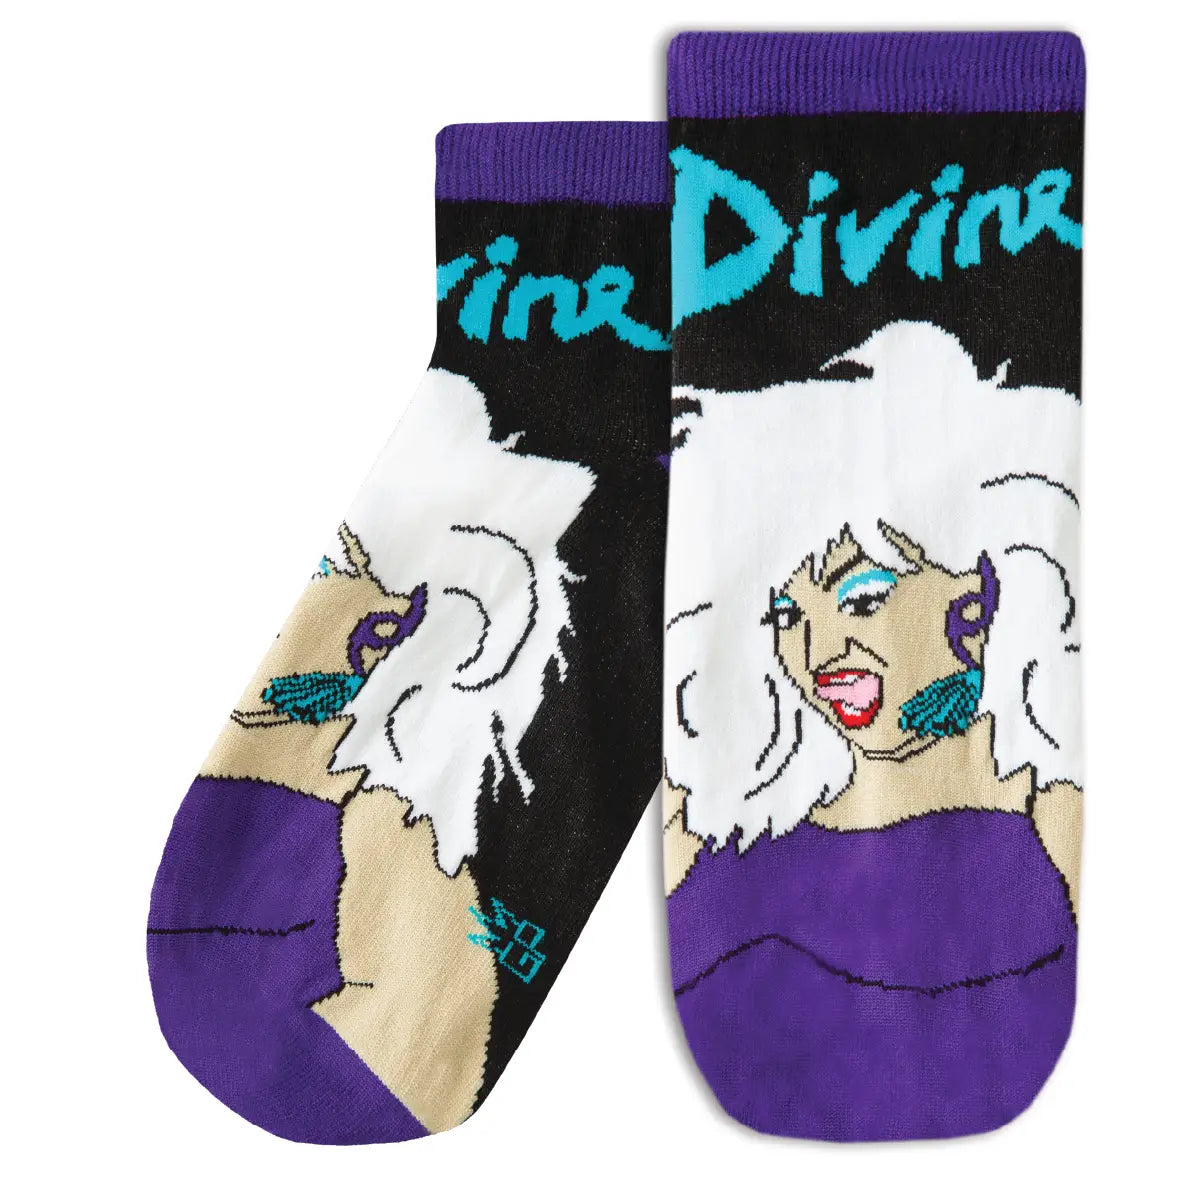 A pair of black ankle socks with purple cuffs and toes with an image of Divine with her name written in blue type above